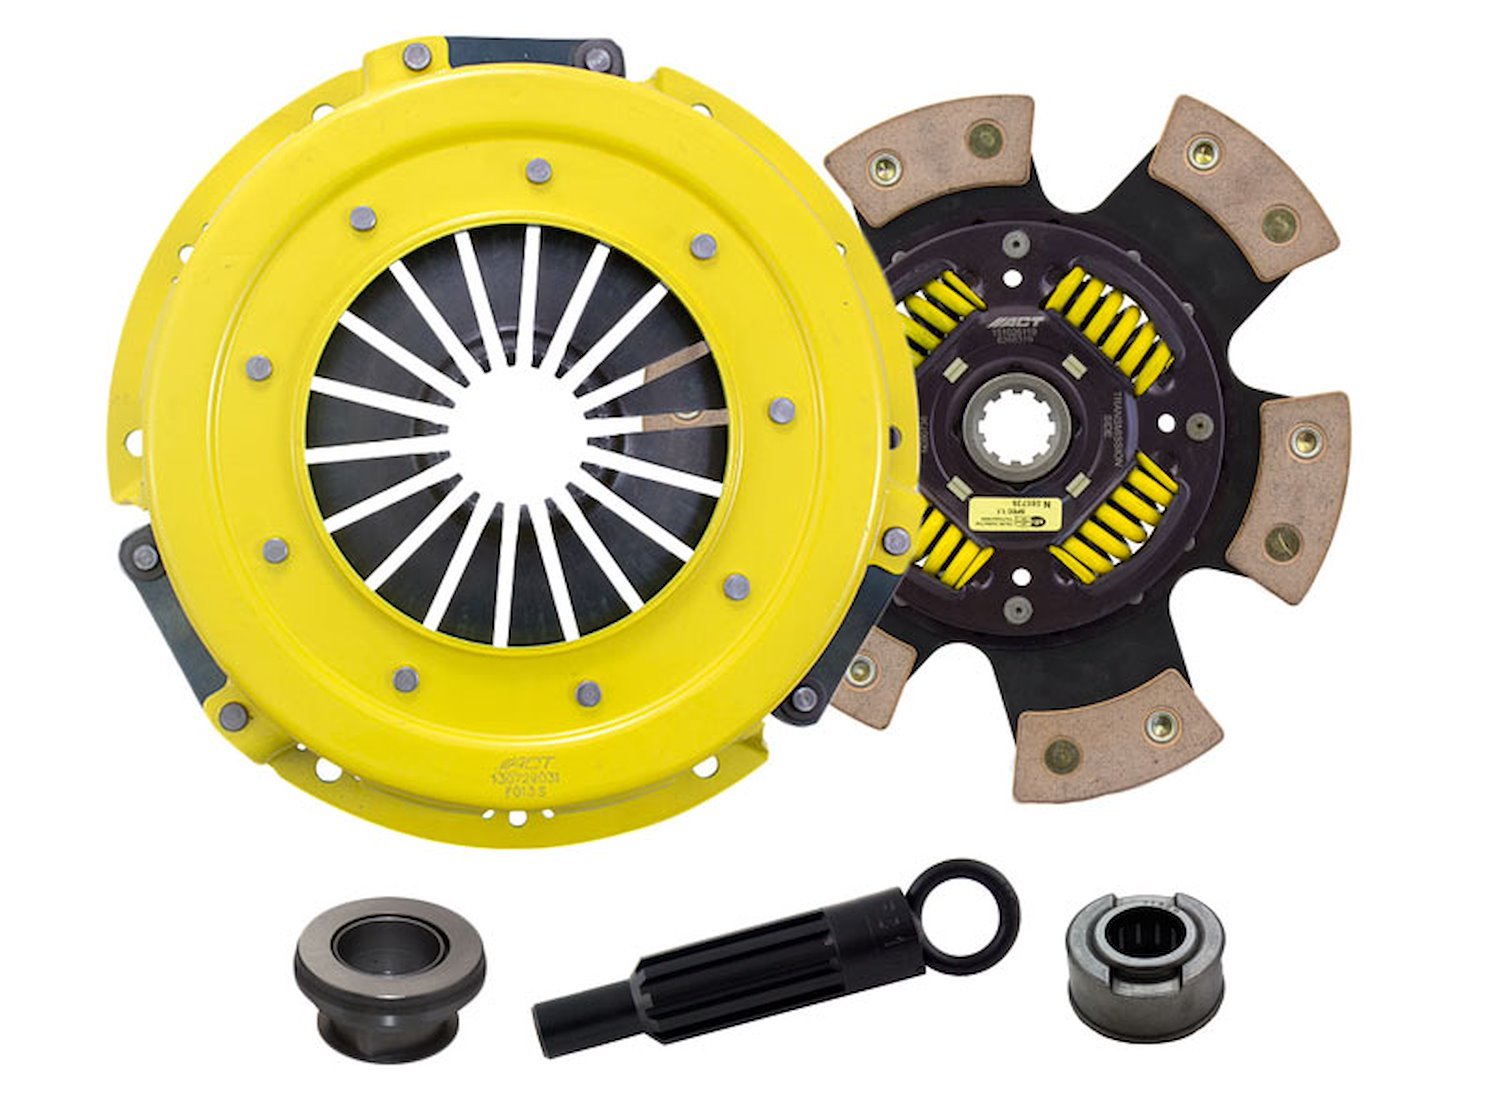 Sport/Race Sprung 6-Pad Transmission Clutch Kit Fits Select Ford/Lincoln/Mercury/Mazda